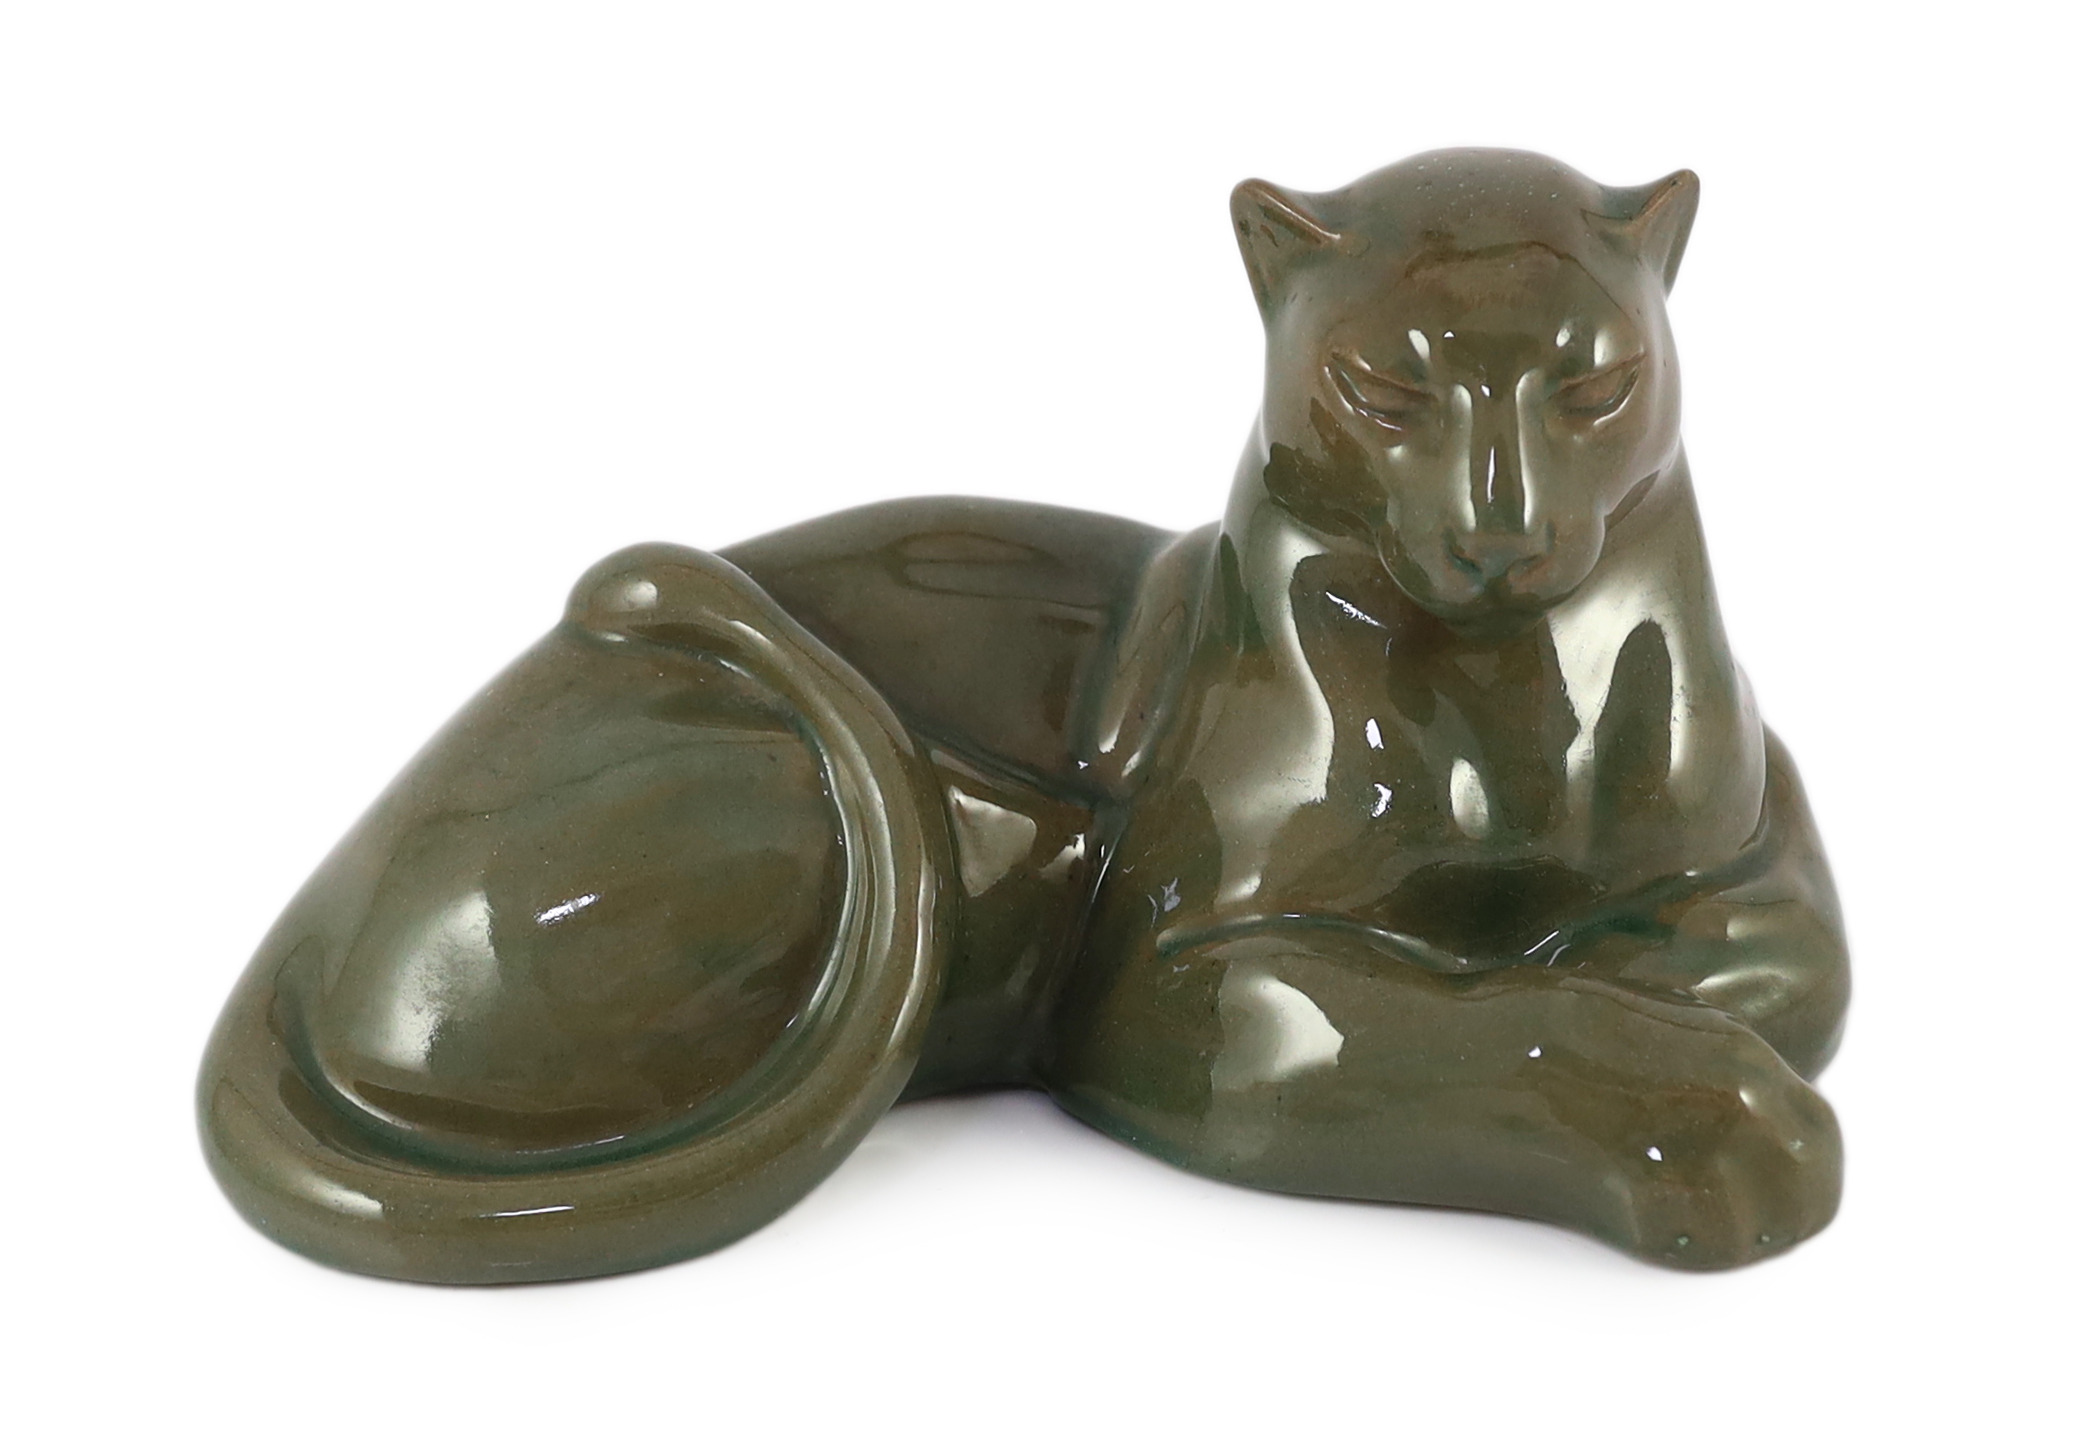 Octave Larrieu (French, 1881-1965). An Art Deco pottery model of a panther                                                                                                                                                  